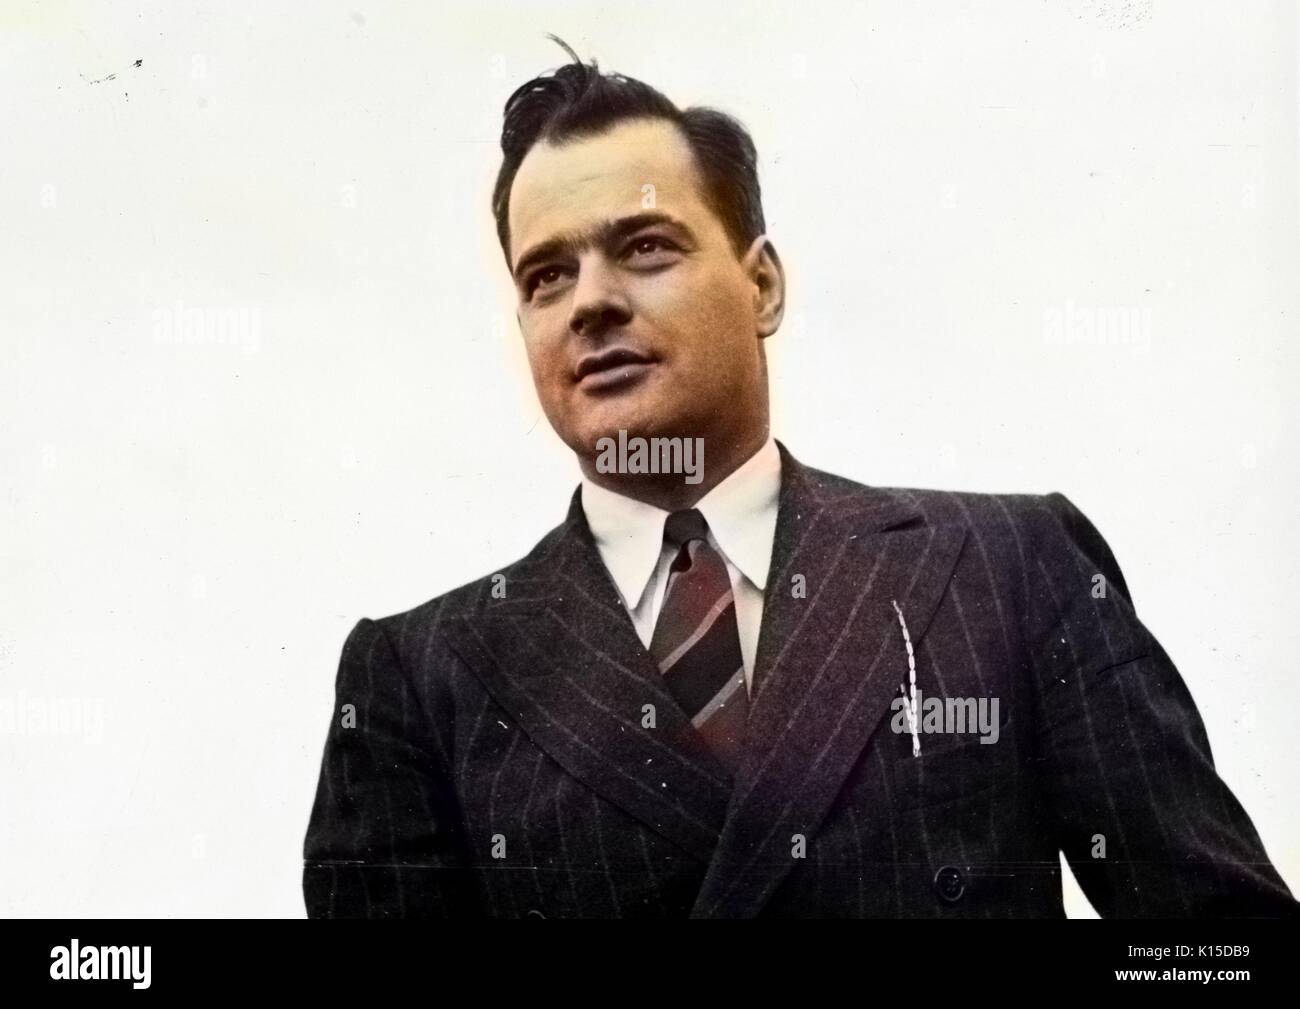 Pare Lorentz, director of 'The River', 1937. From the New York Public Library. Note: Image has been digitally colorized using a modern process. Colors may not be period-accurate. Stock Photo